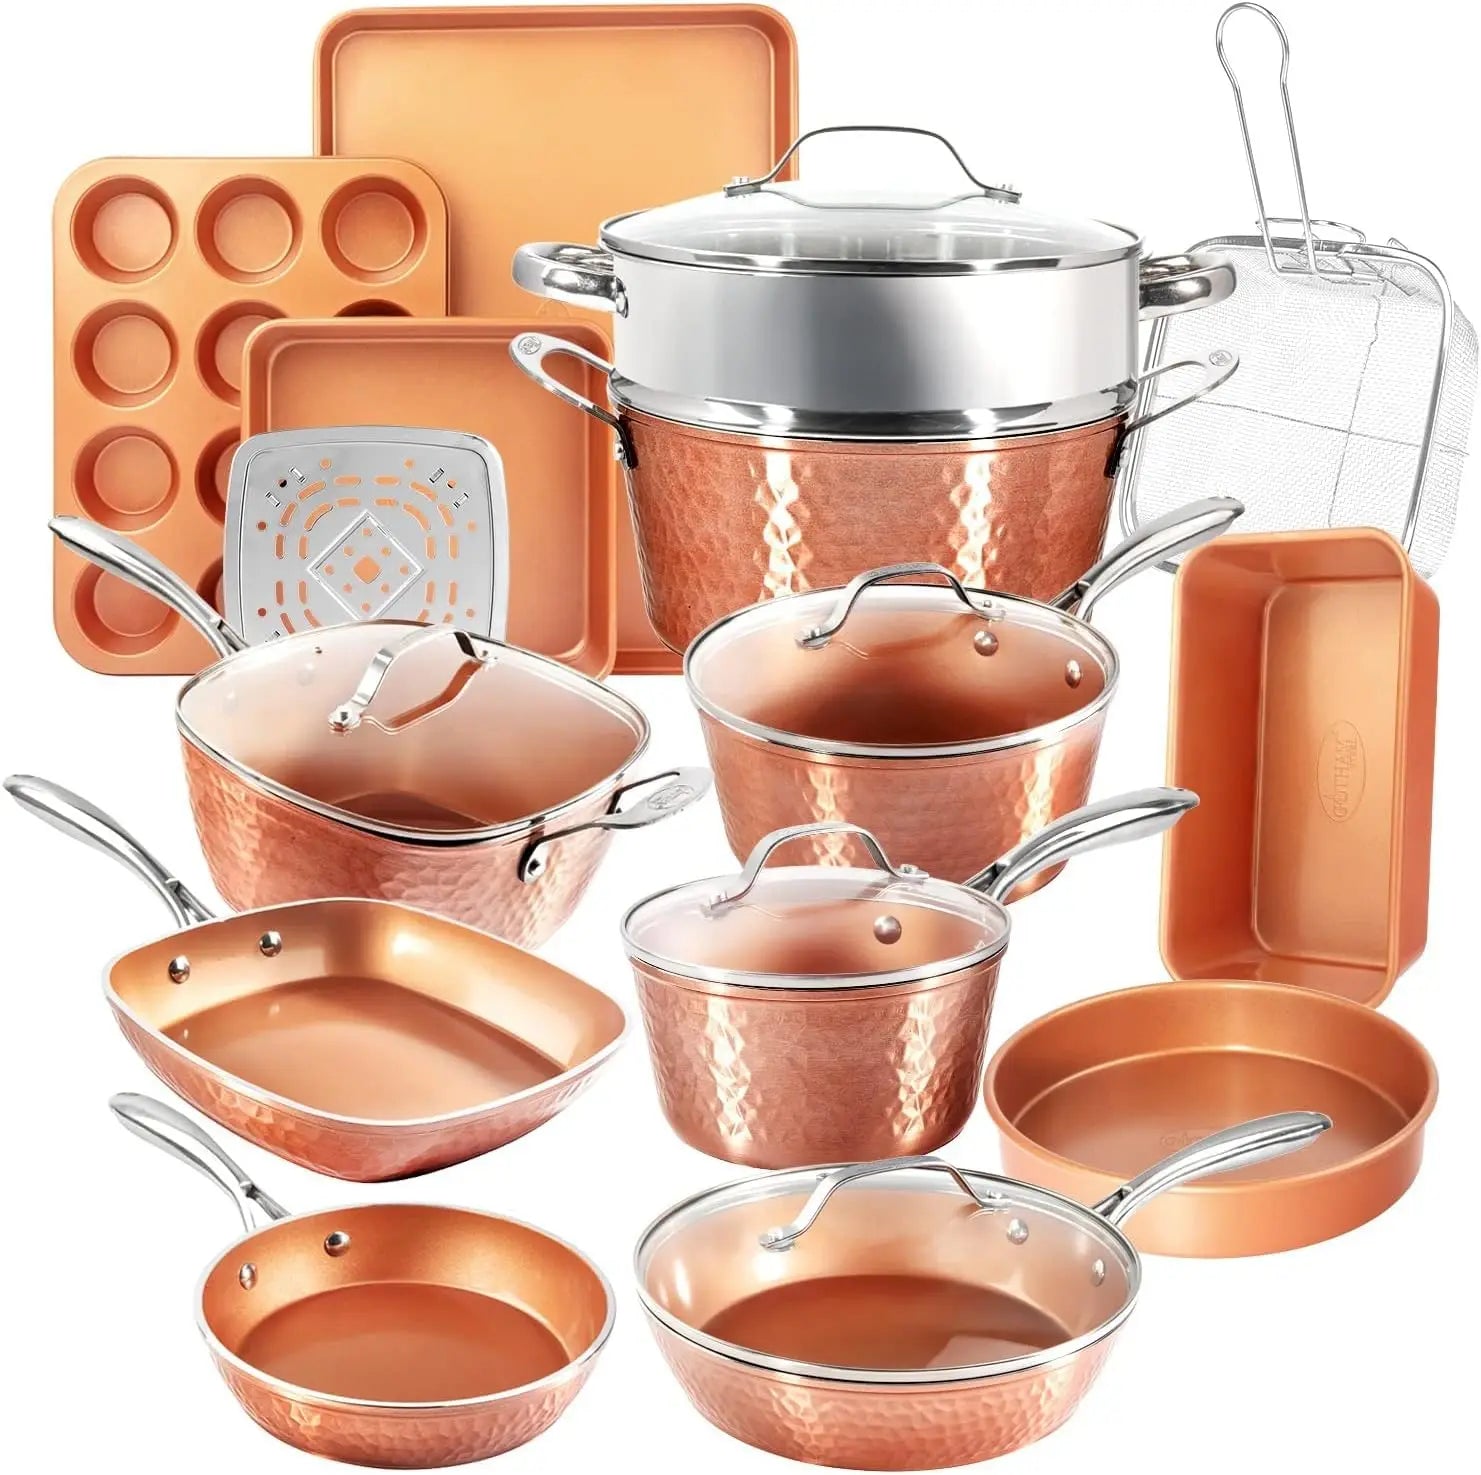 Steel Hammered Copper Collection – 20 Piece Premium Pots and Pans Set Nonstick Ceramic Cookware + Bakeware Set for Kitche Homely Accents Store